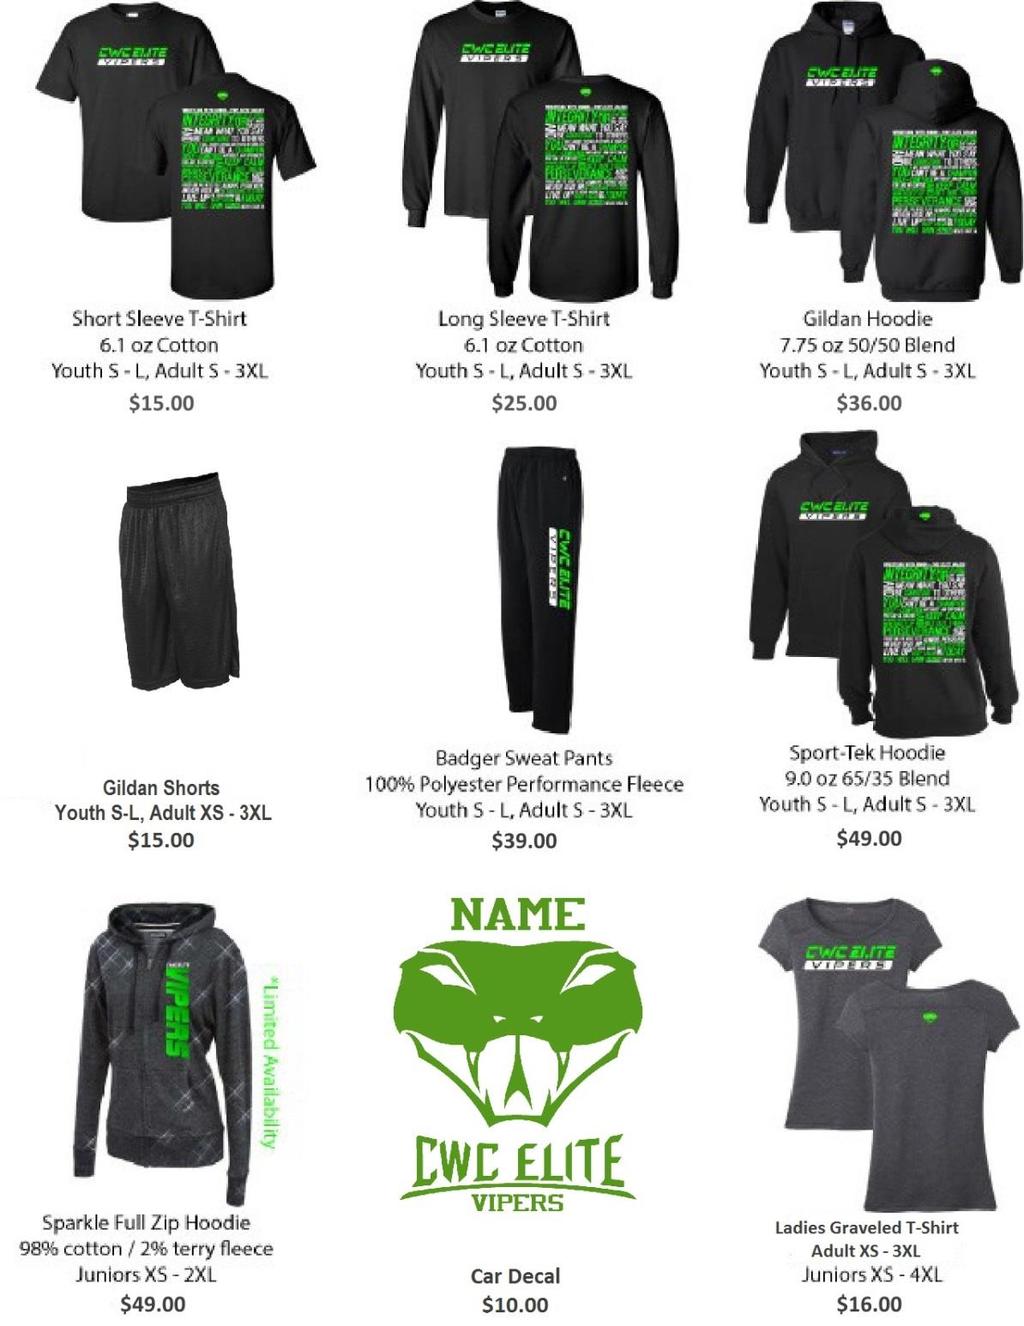 Team Gear Order Forms Orders are placed on the